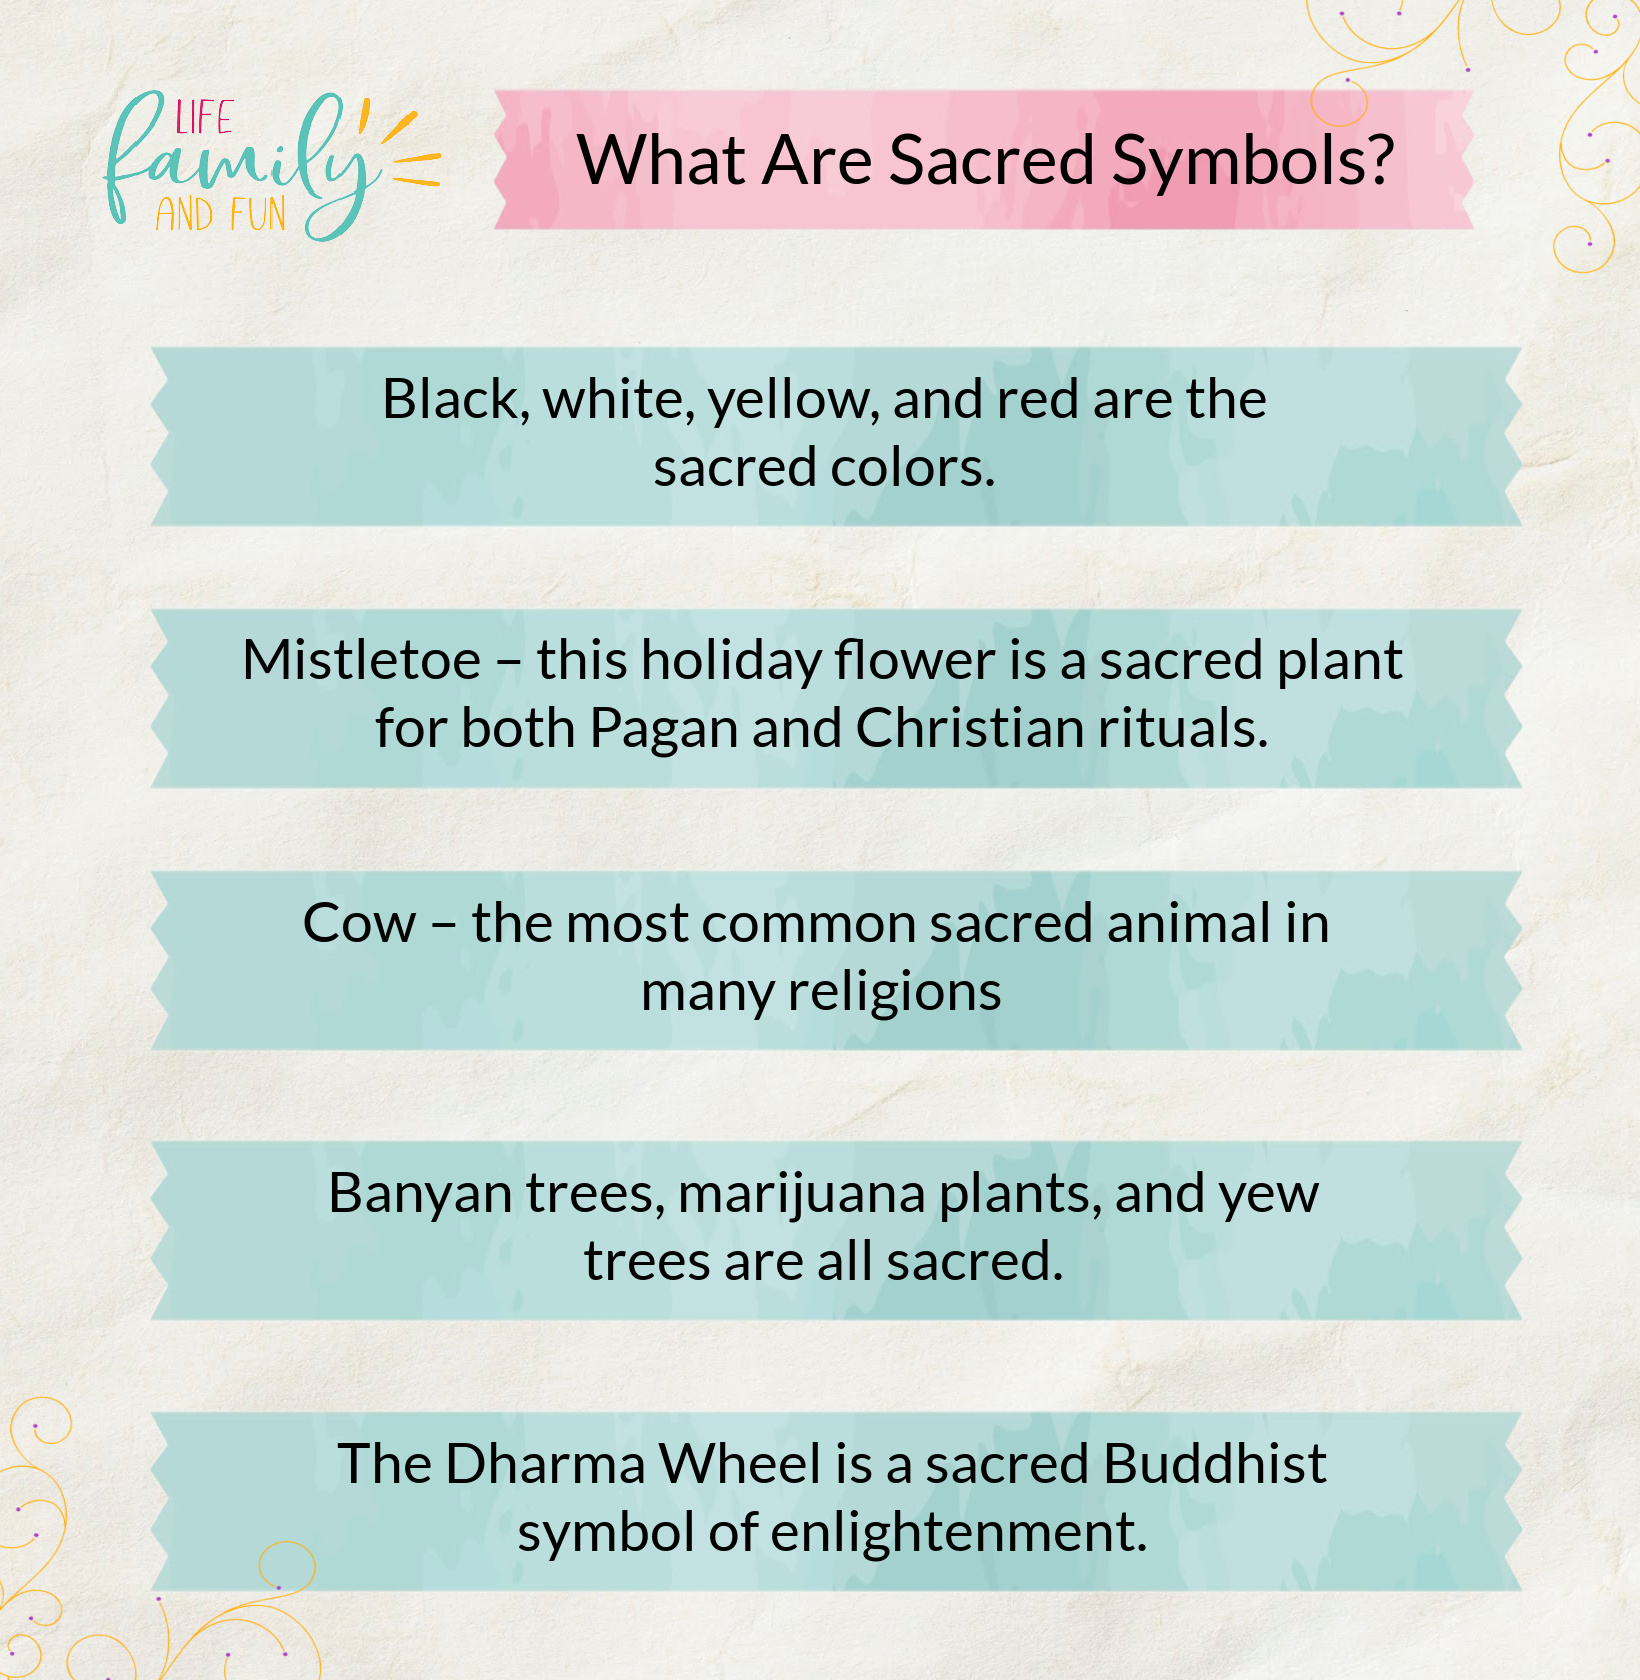 What Are Sacred Symbols?